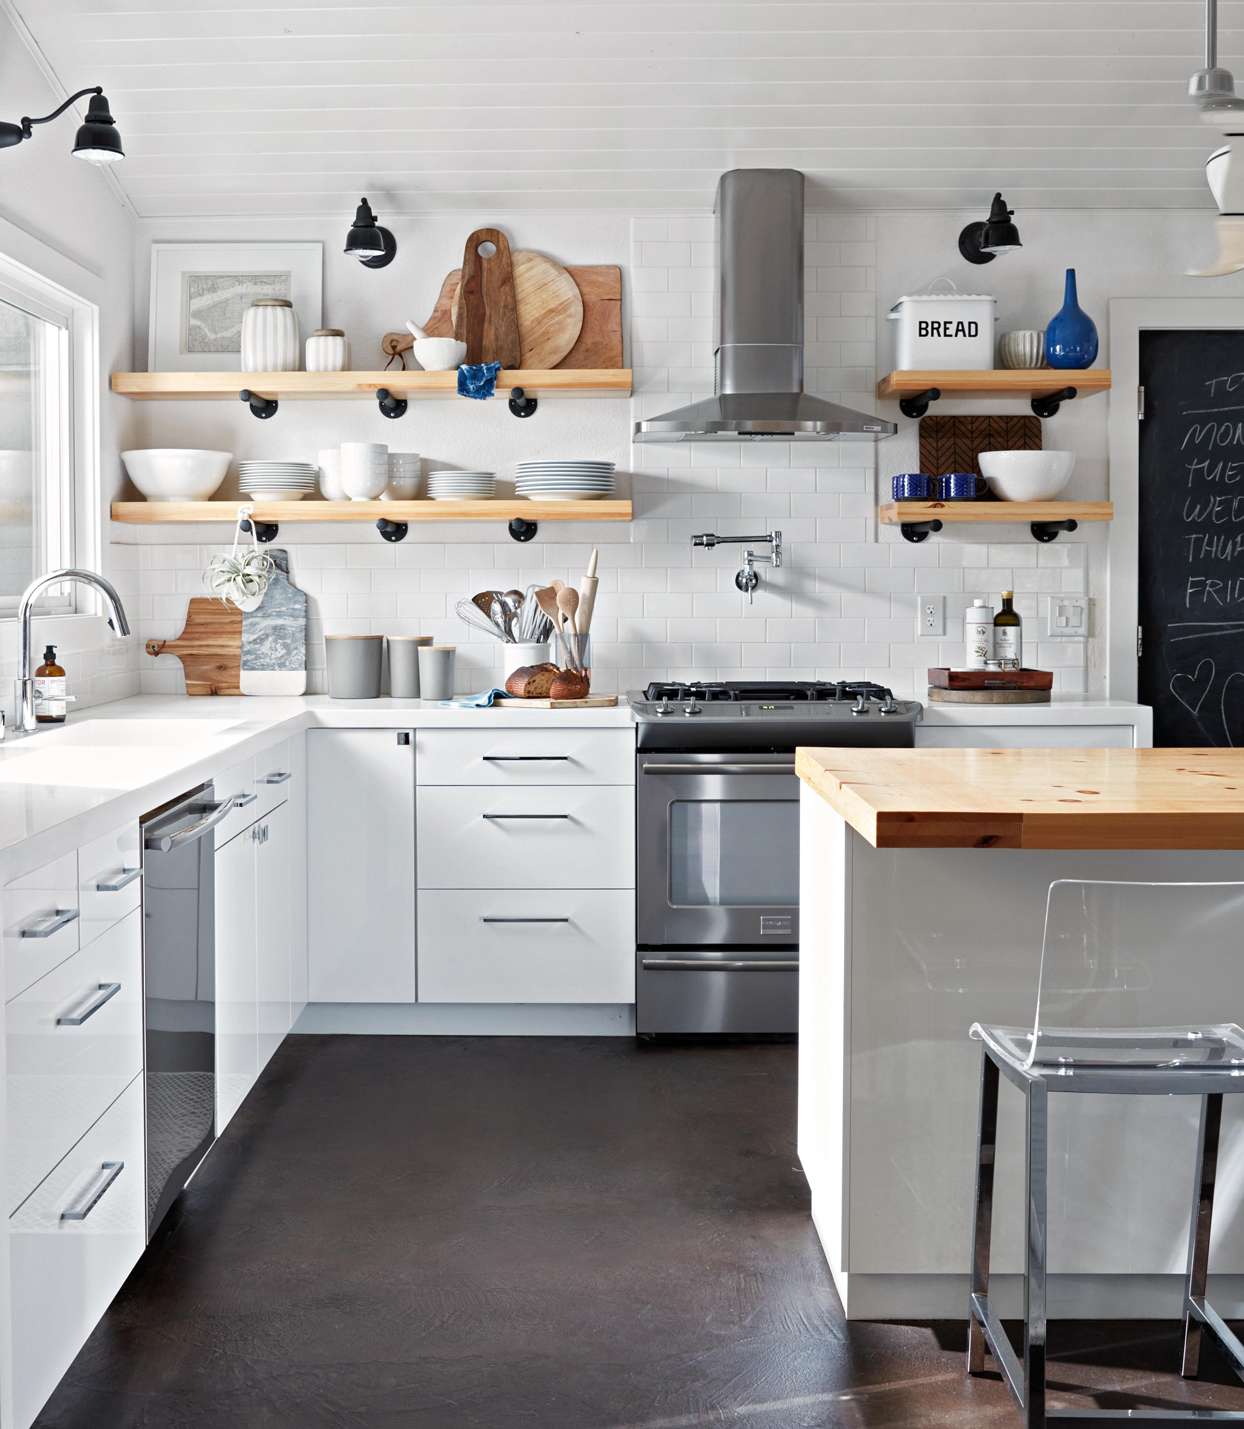 Make A Small Kitchen Look Larger With These Clever Design Tricks Better Homes Gardens